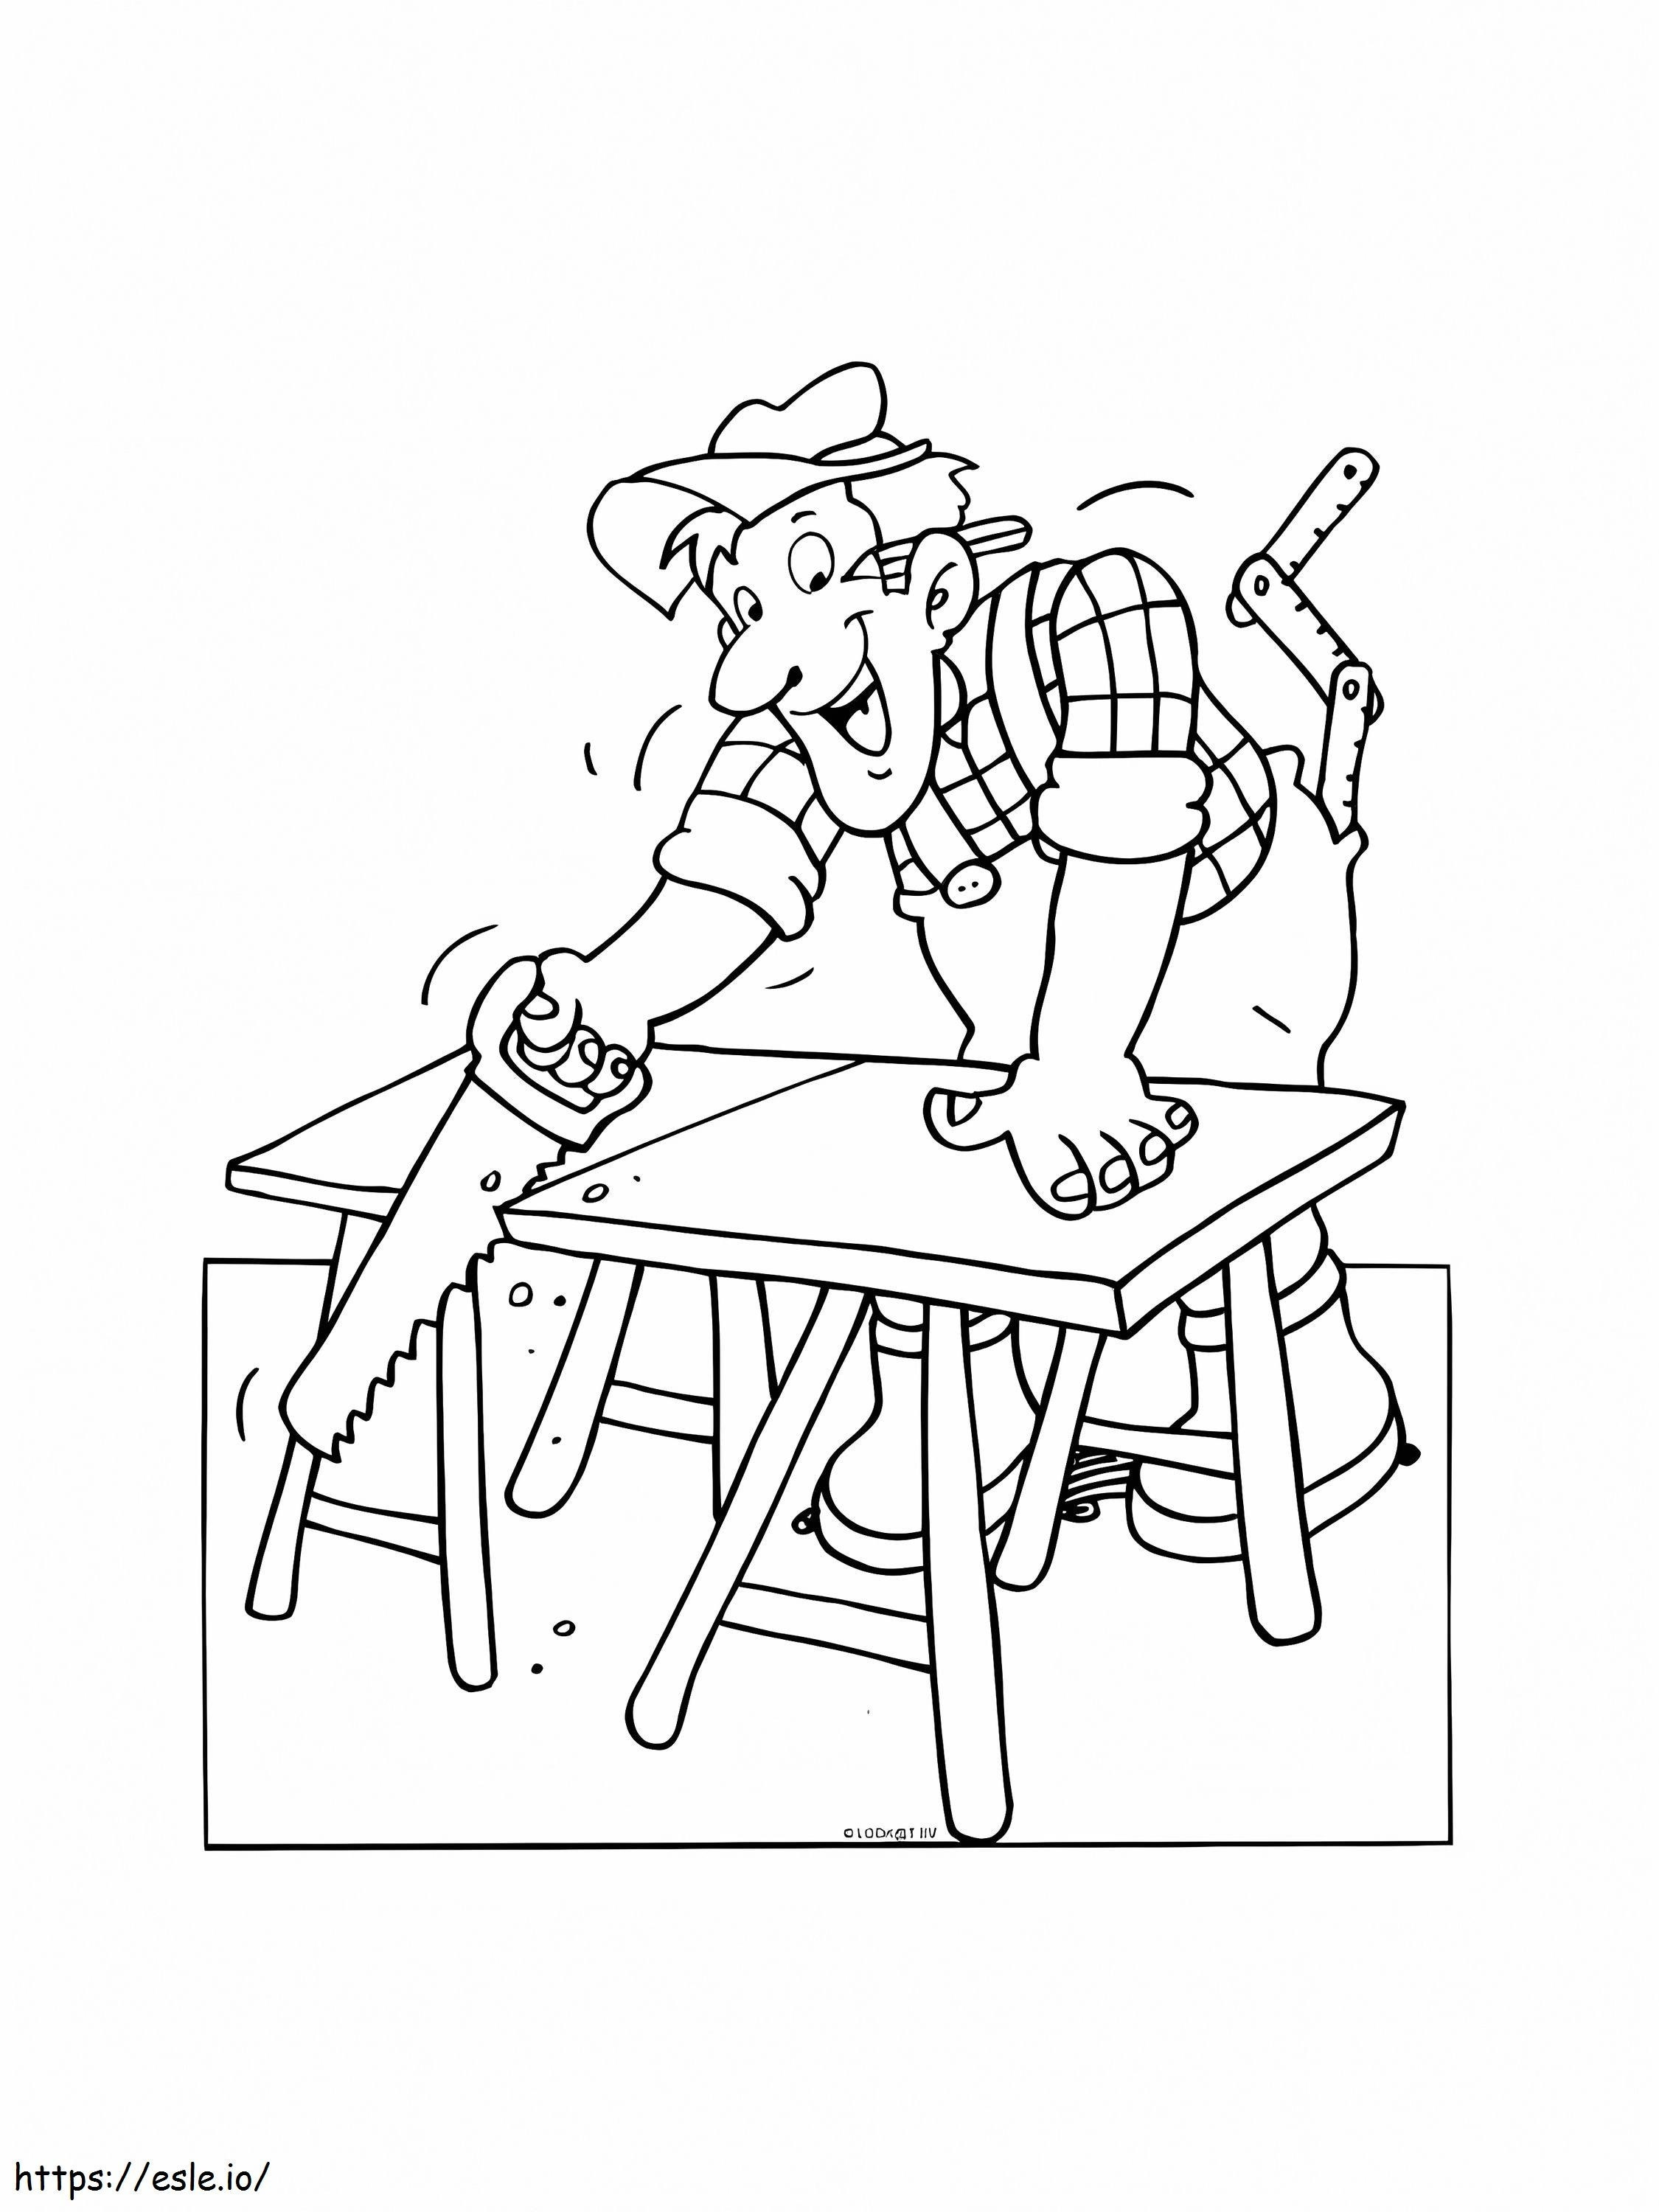 Carpenter Working coloring page